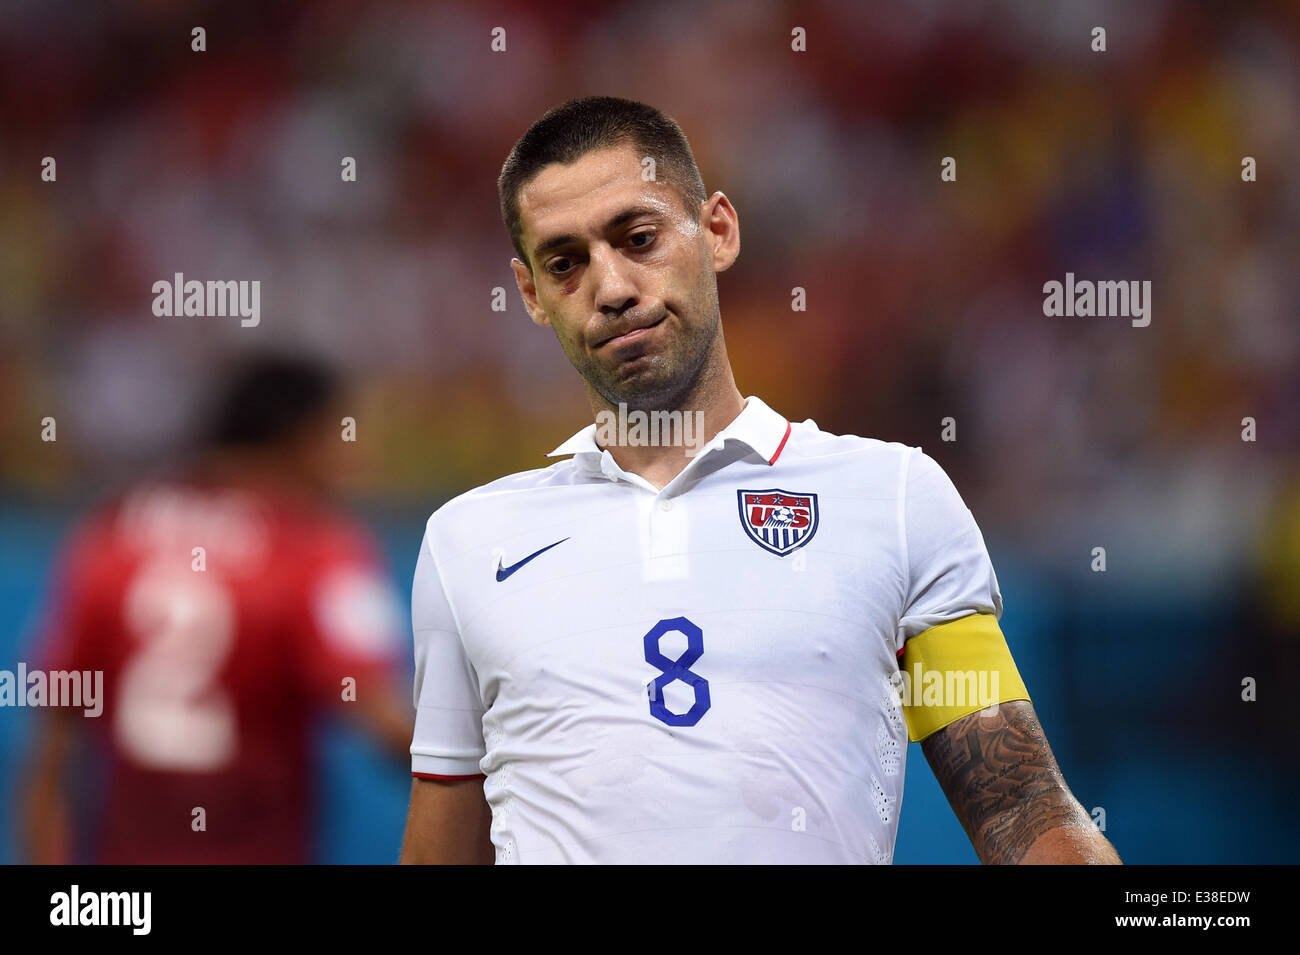 Manaus, Brazil. 22nd June, 2014. Clint Dempsey of USA reacts during the FIFA World Cup 2014 group G preliminary round match between the USA and Portugal at the Arena Amazonia Stadium in Manaus, Brazil, 22 June 2014. Photo: Marius Becker/dpa/Alamy Live News Stock Photo